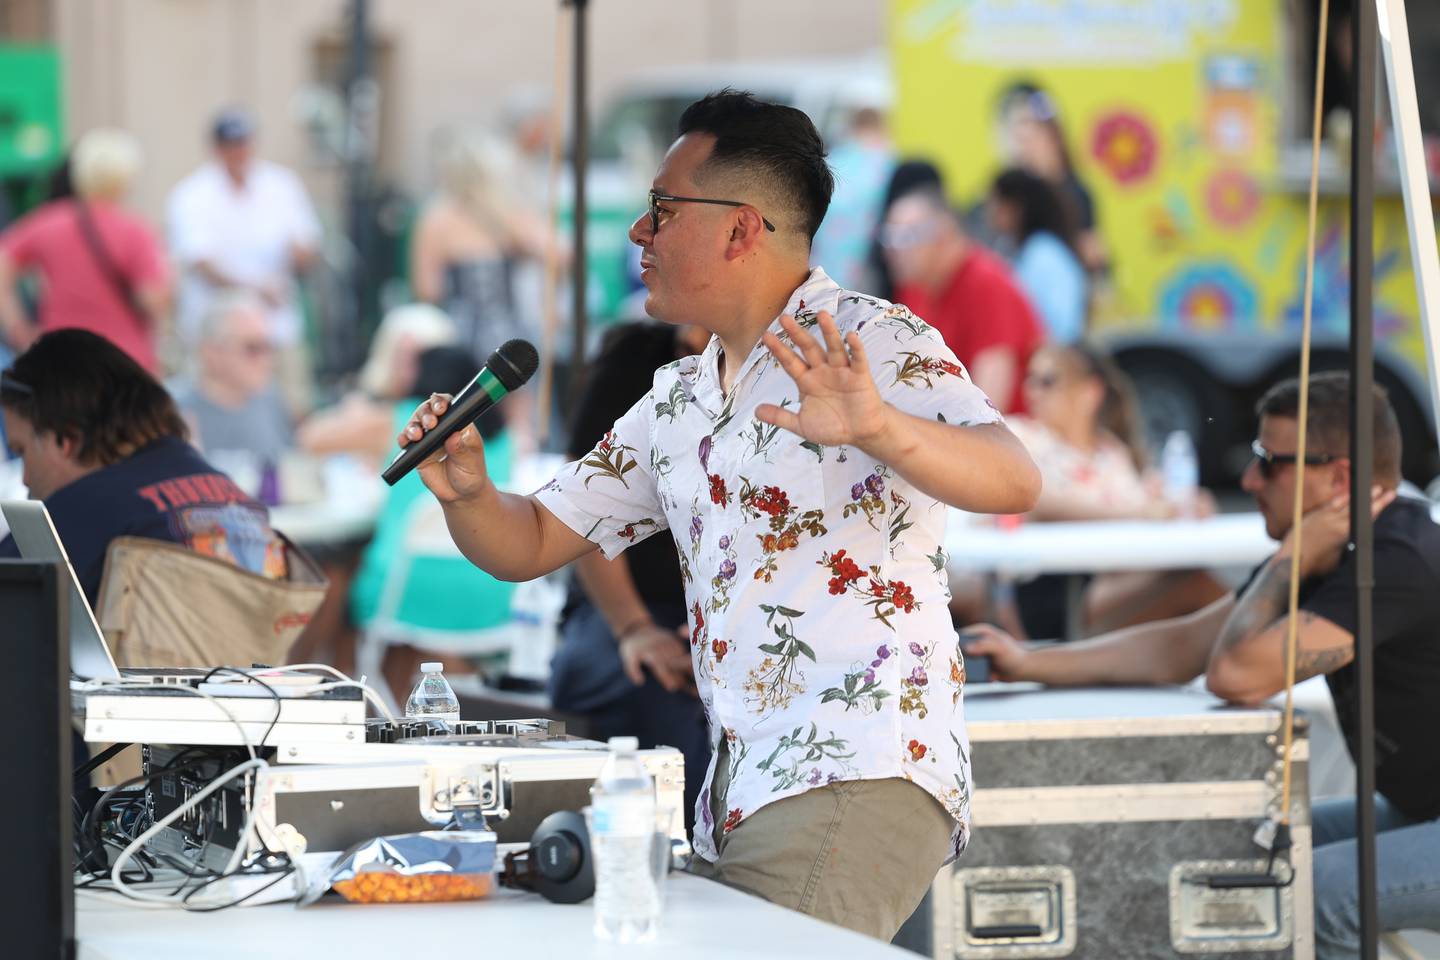 DJ Leon provides the music at Salsa Fest on Friday, June 9, 2023 in Downtown Joliet.